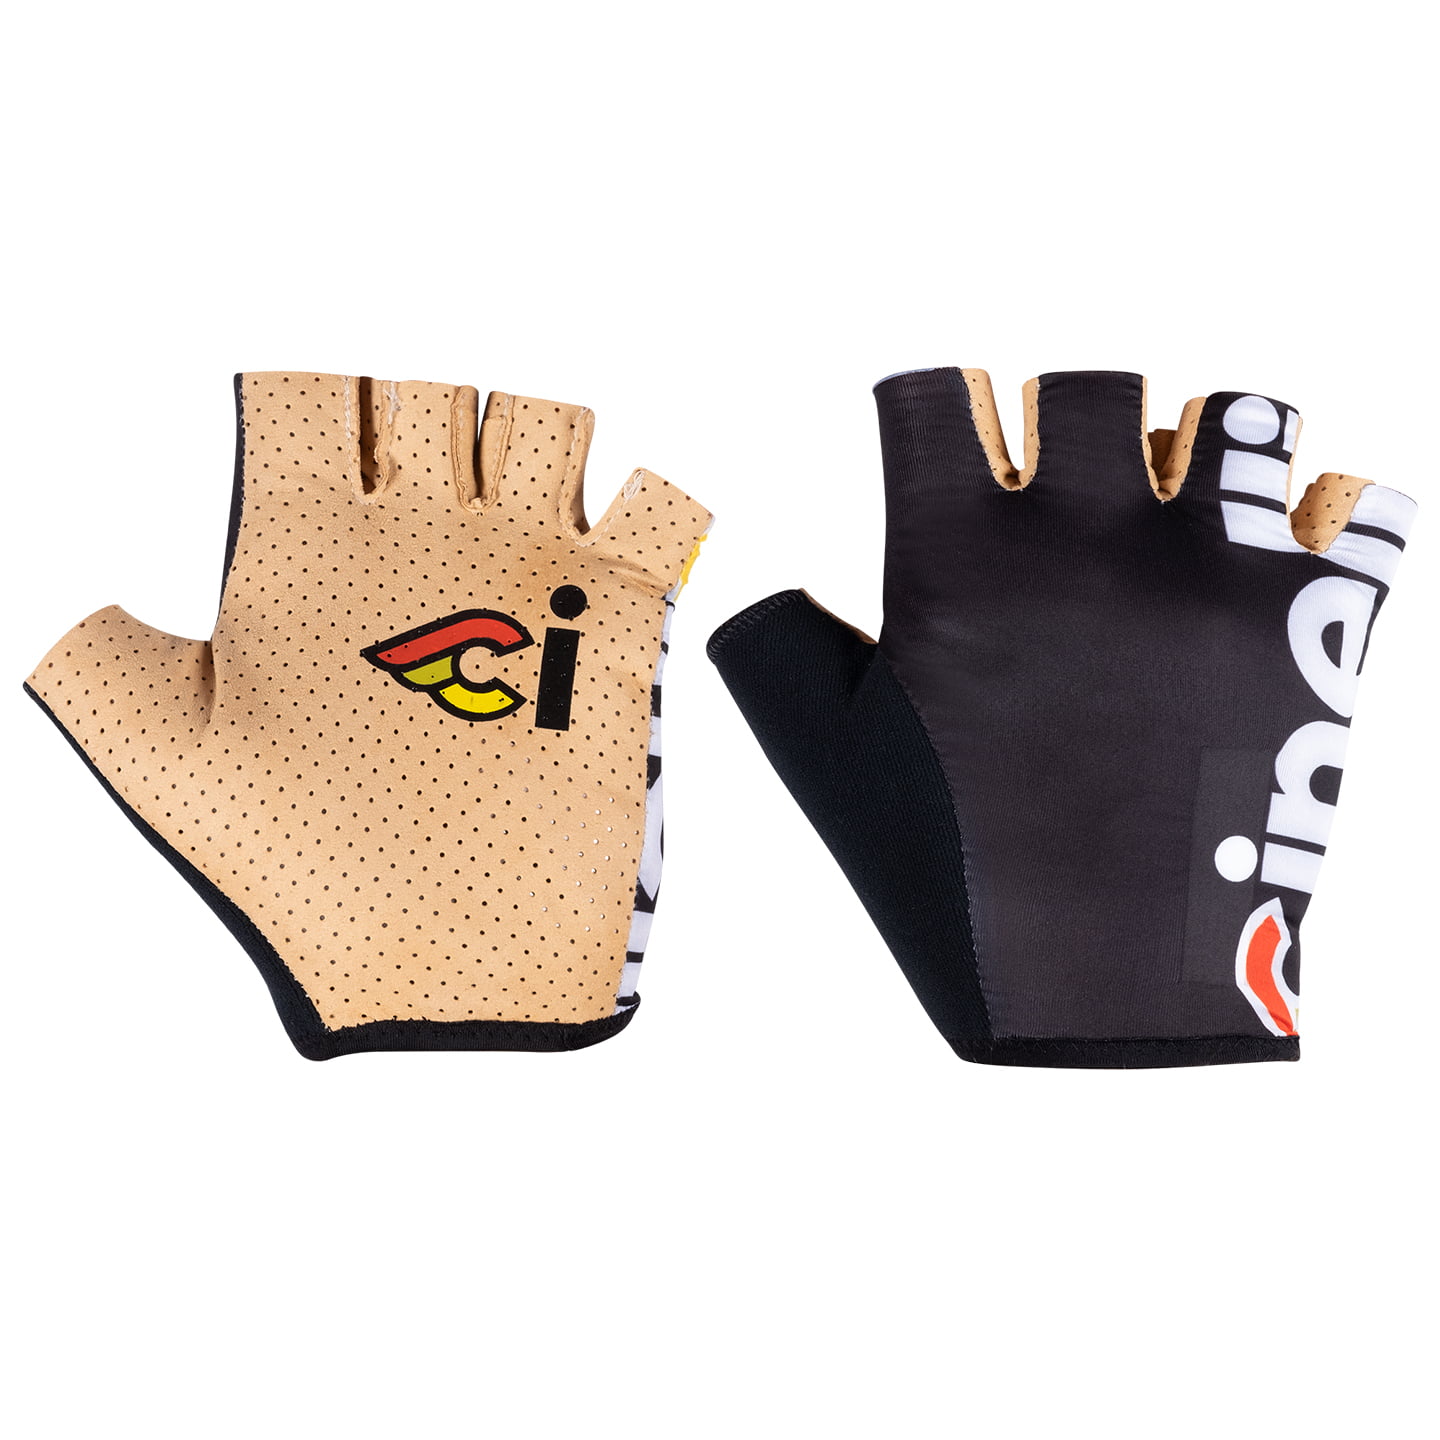 CINELLI Gloves Supercorsa Cycling Gloves, for men, size 2XL, Cycling gloves, Cycle clothing